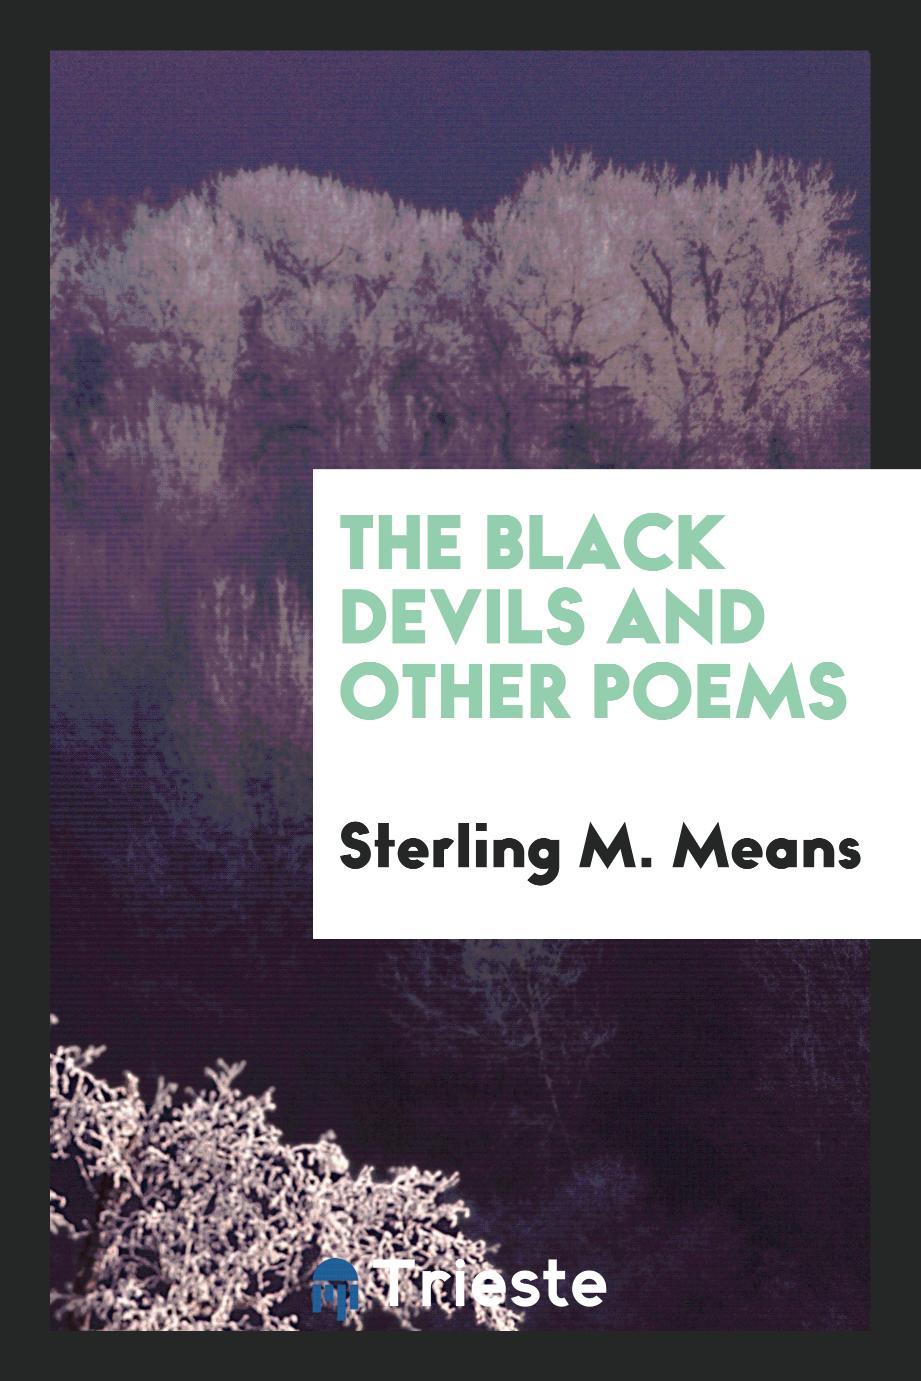 The Black Devils and Other Poems